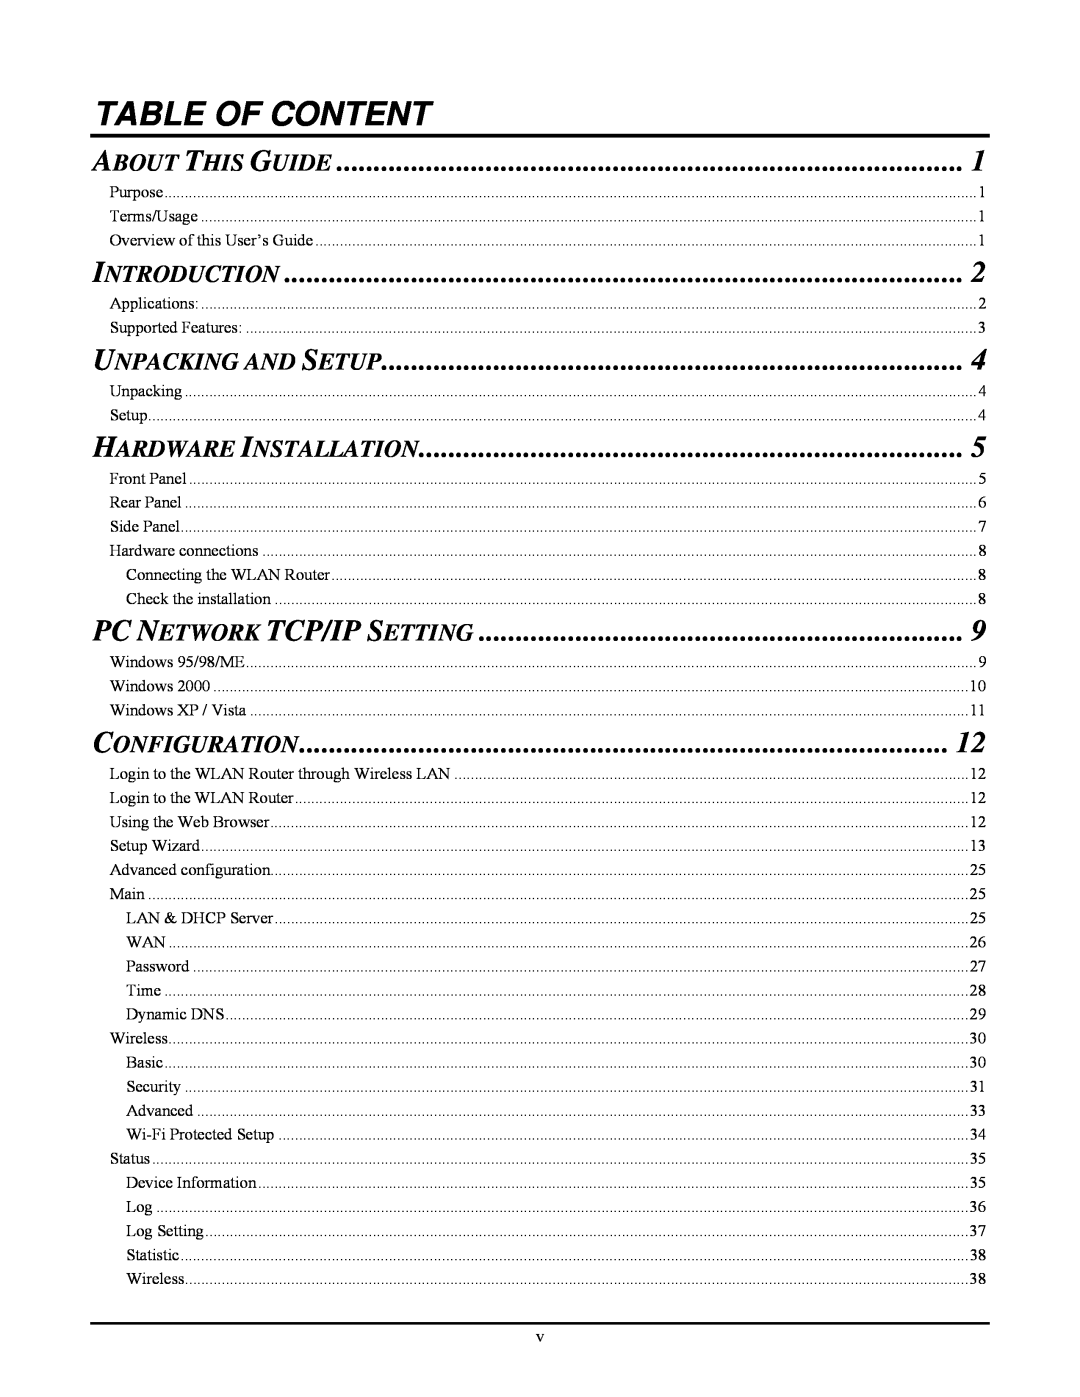 TRENDnet TEW-652BRP manual Table Of Content, About This Guide, Introduction, Unpacking And Setup, Hardware Installation 